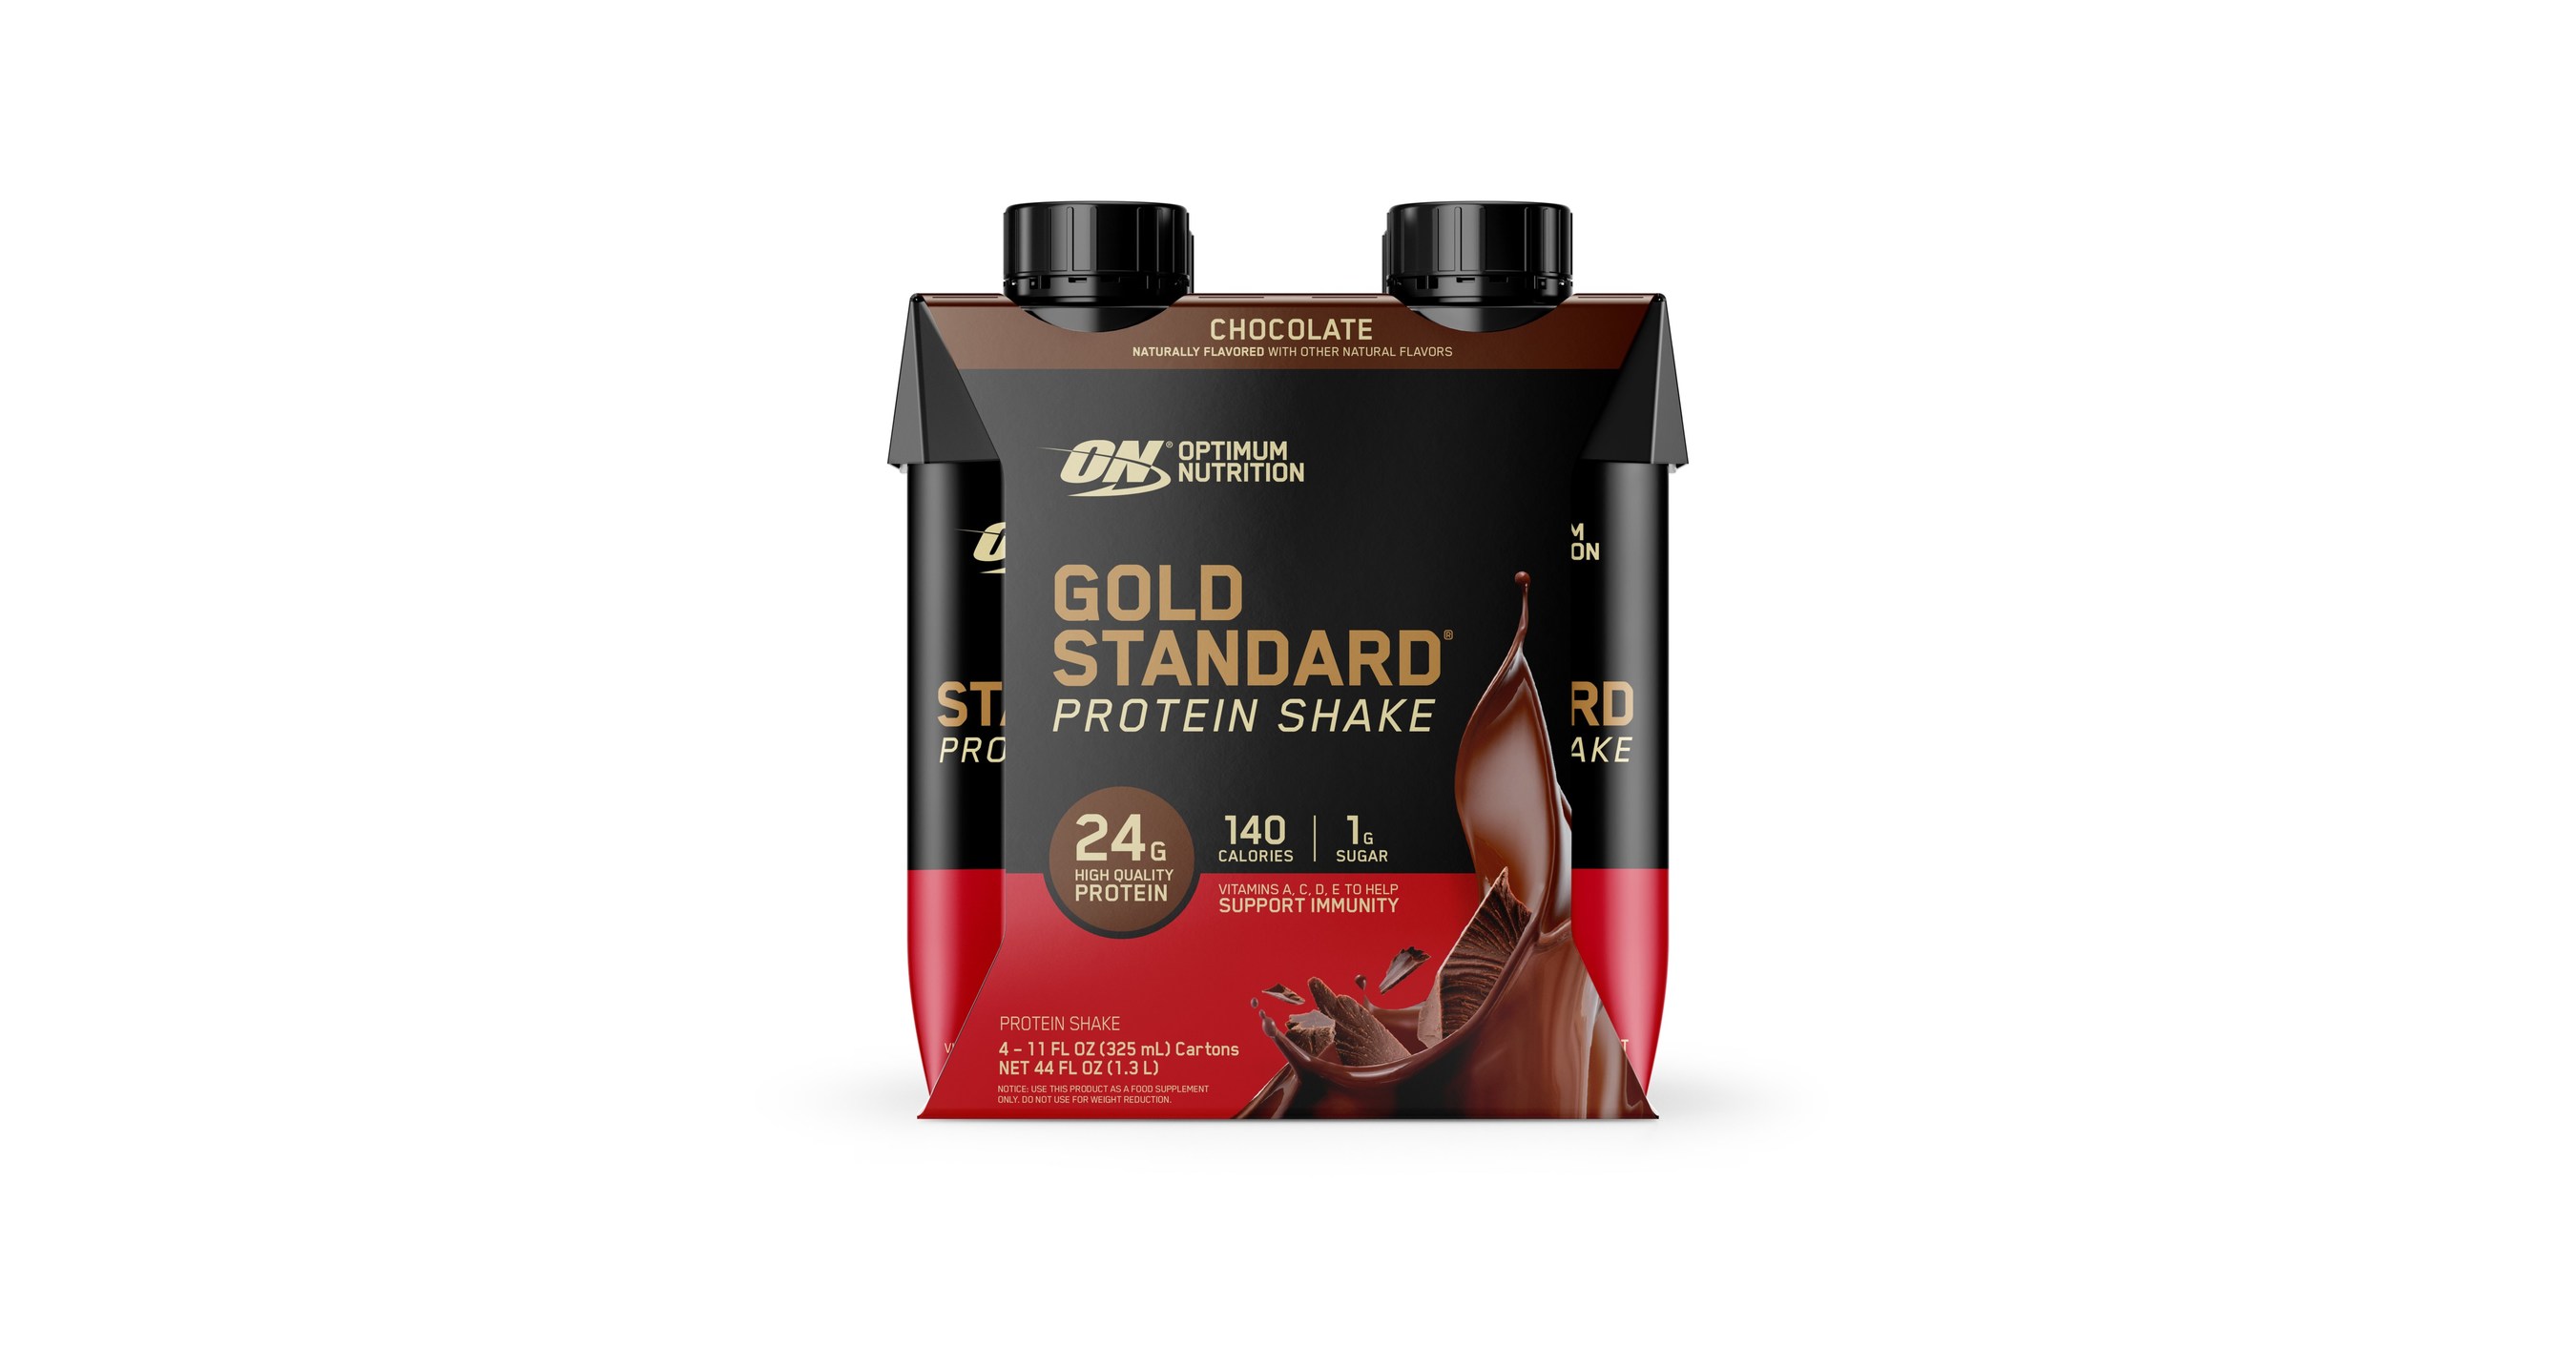 Optimum Nutrition debuts four limited-edition flavors